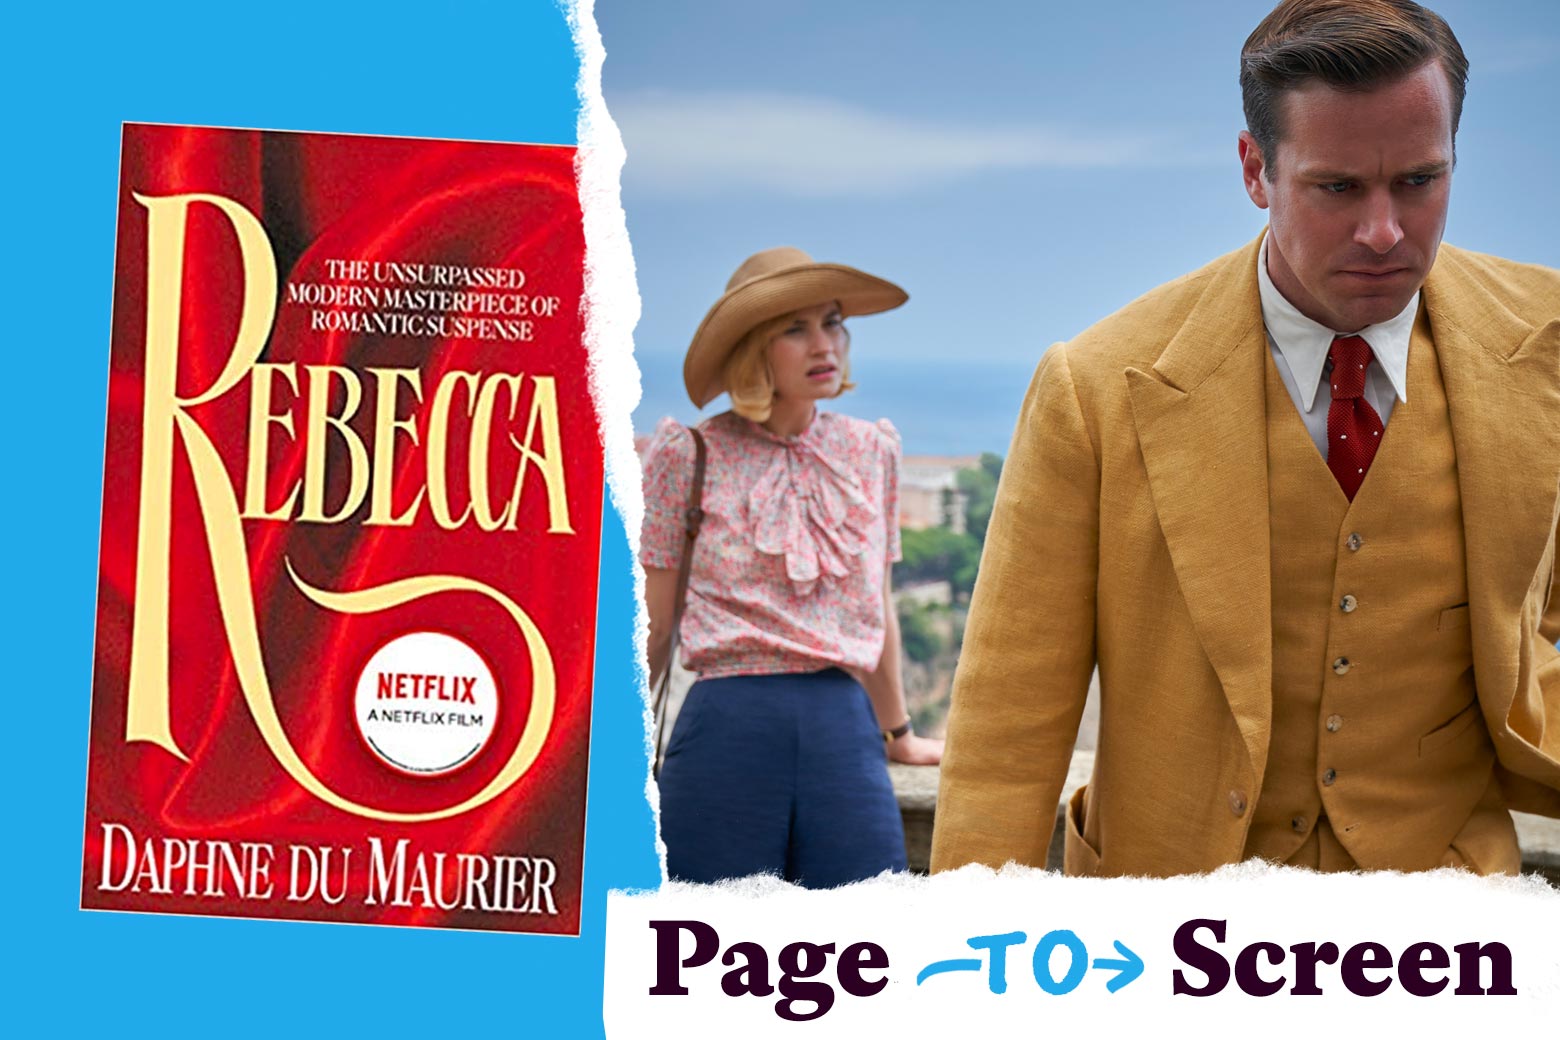 Left, the cover of Rebecca by Daphne du Maurier. Right, a frowning Armie Hammer, wearing a mustard-colored suit, walks away from Lily James in the background. A tearaway logo reads "Page to Screen."